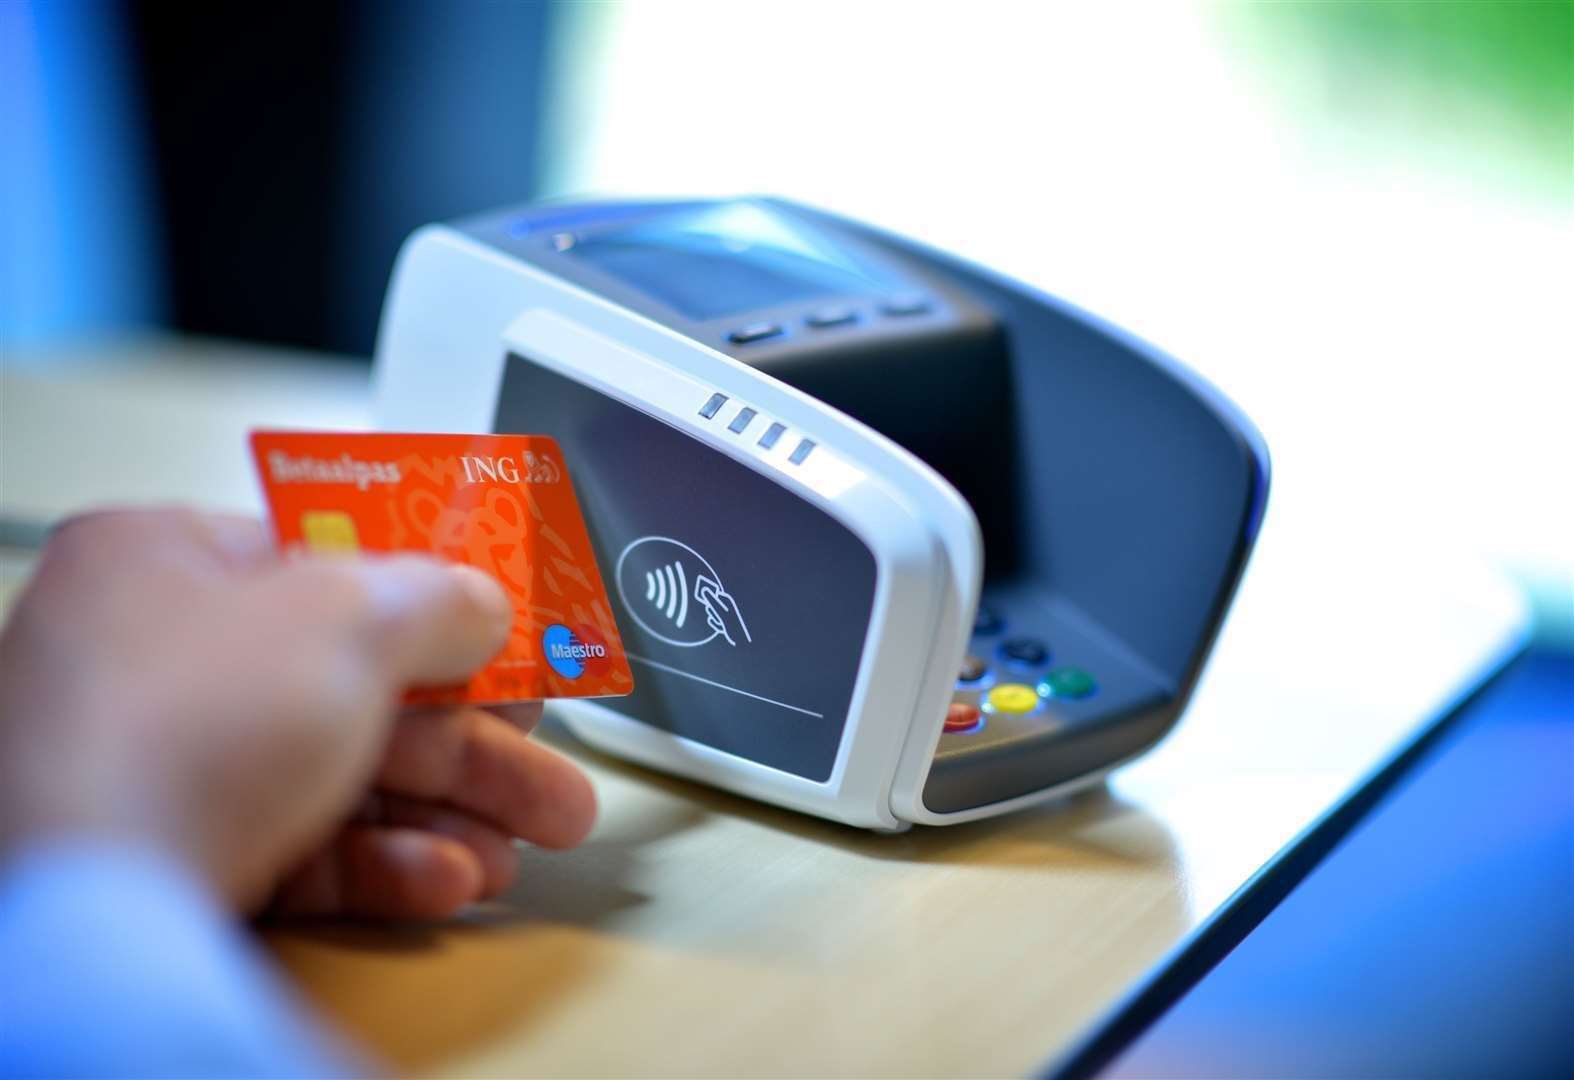 More and more traders are now preferring contactless payment to avoid possible contamination